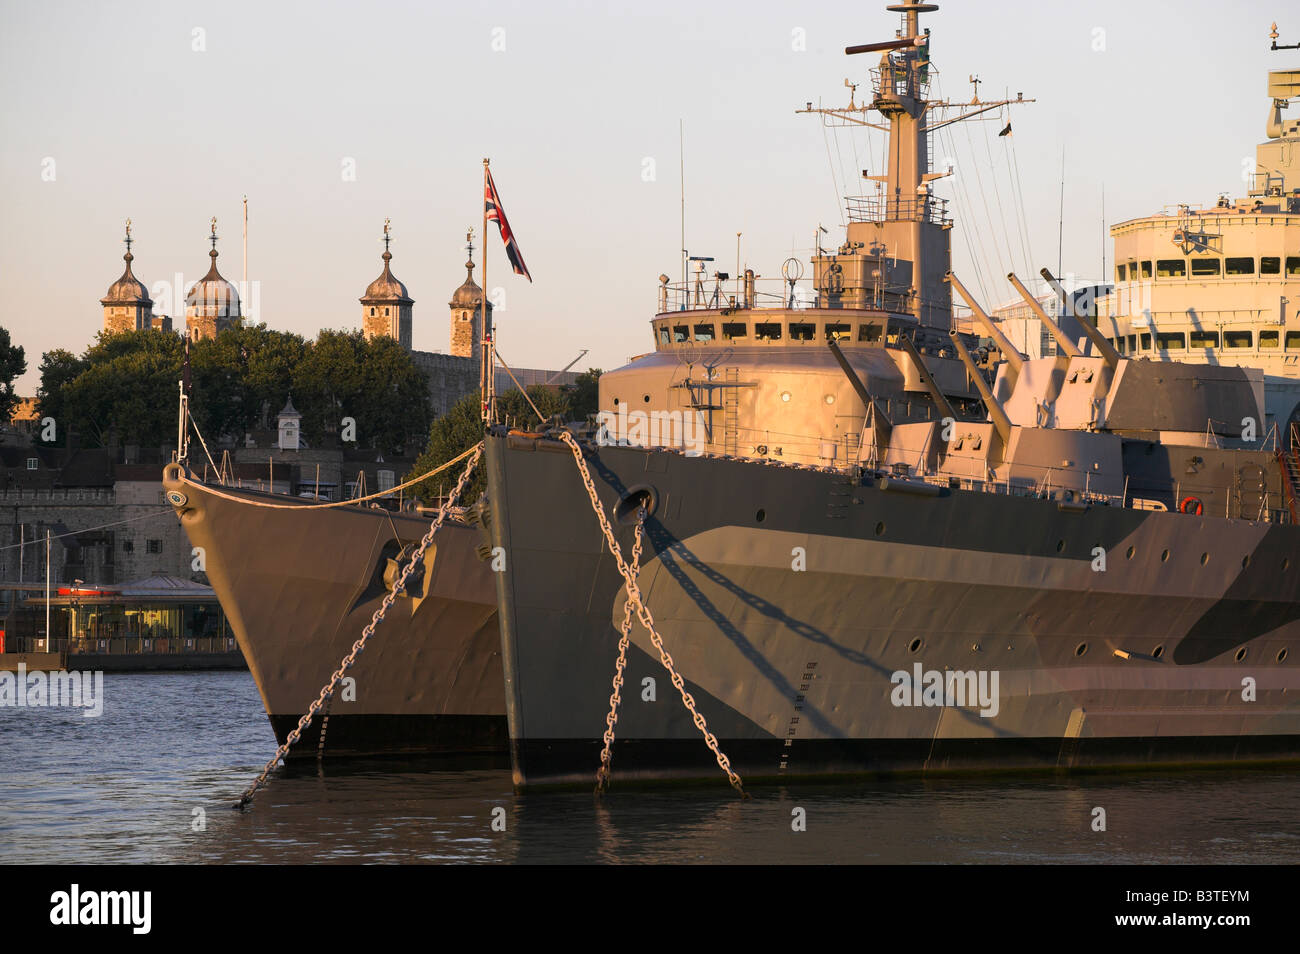 England, London, HMS Belfast, a WW2 battleship now converted into a floating museum, is moored on the Thames near Tower Bridge. Stock Photo